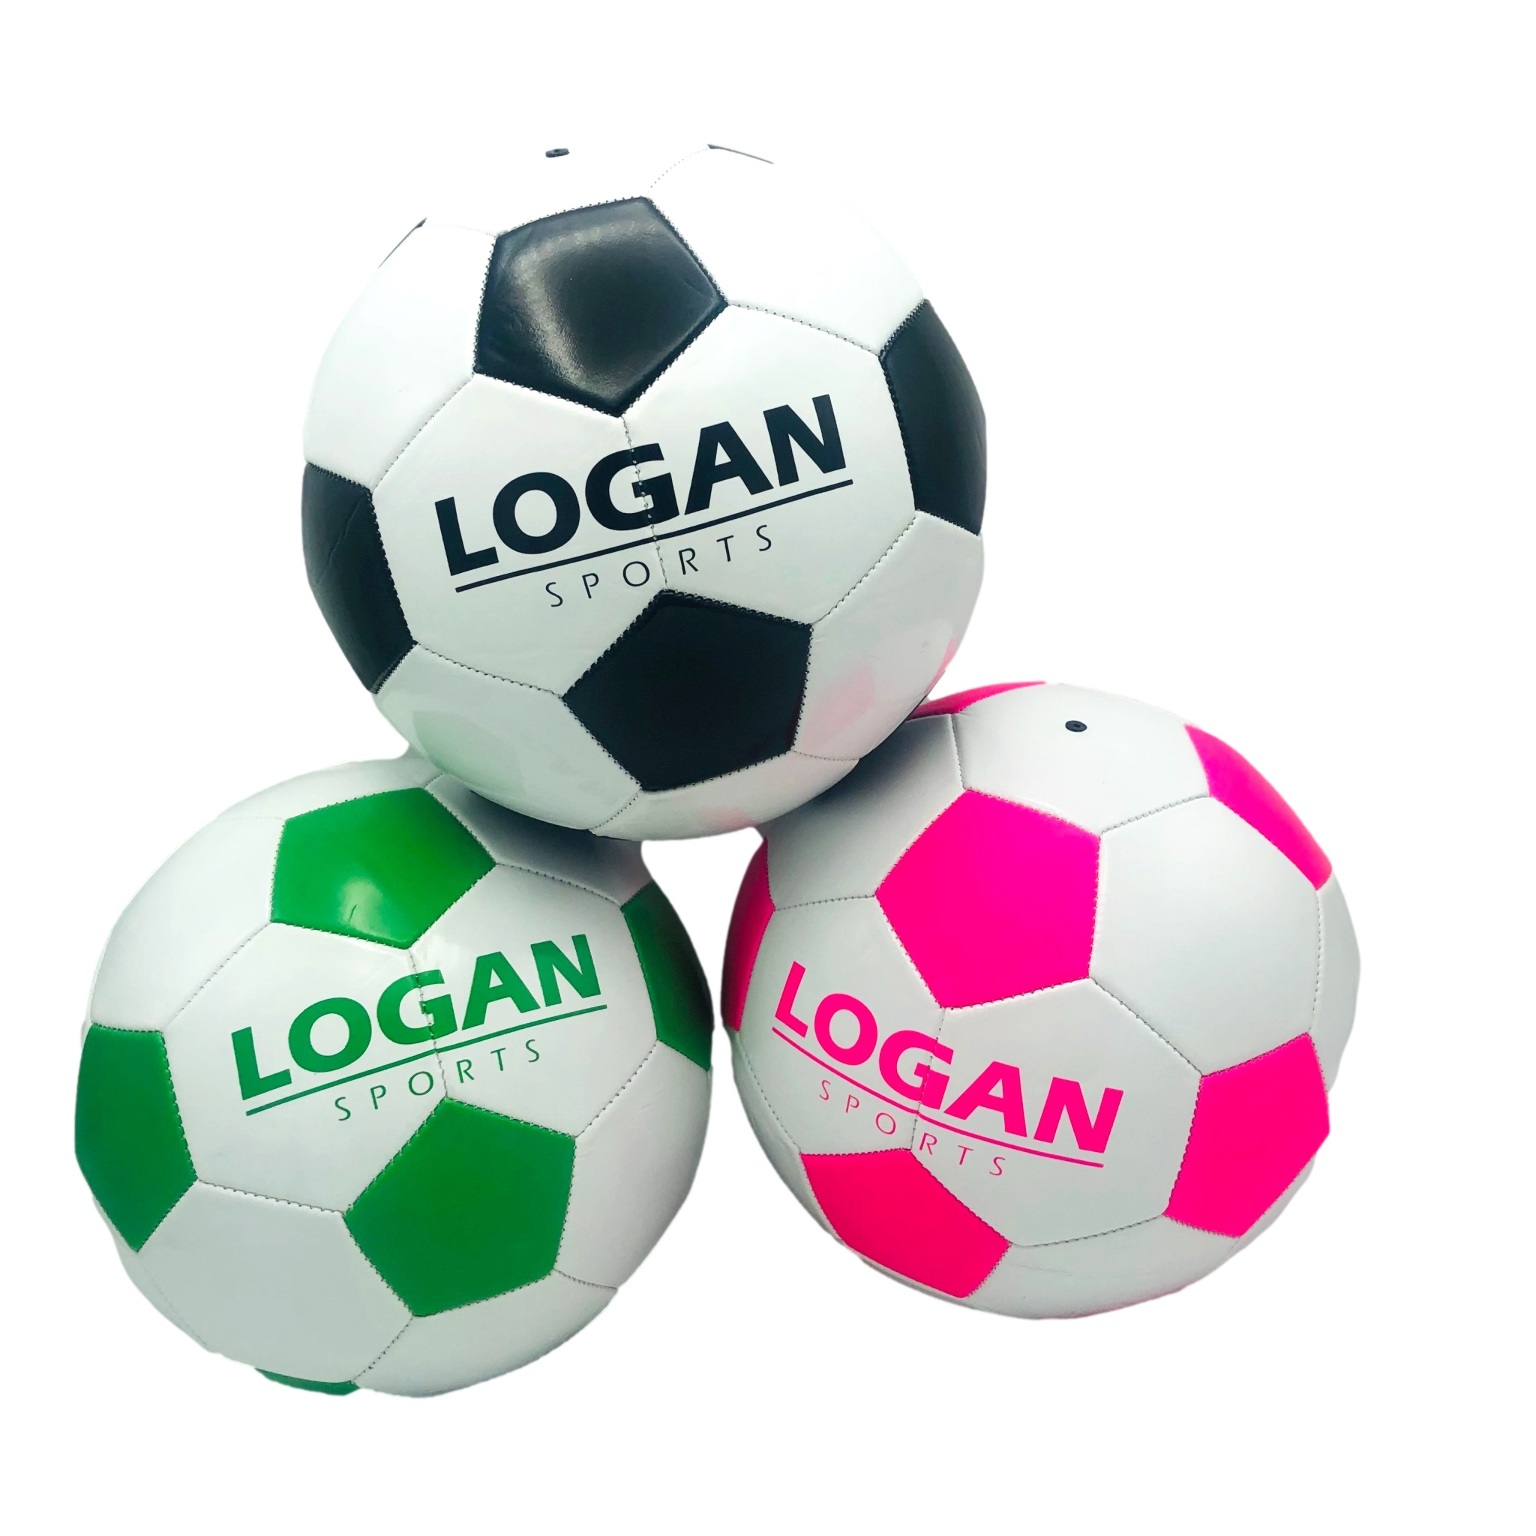 Stitched Soccer Balls - Size 5, Assorted Colors